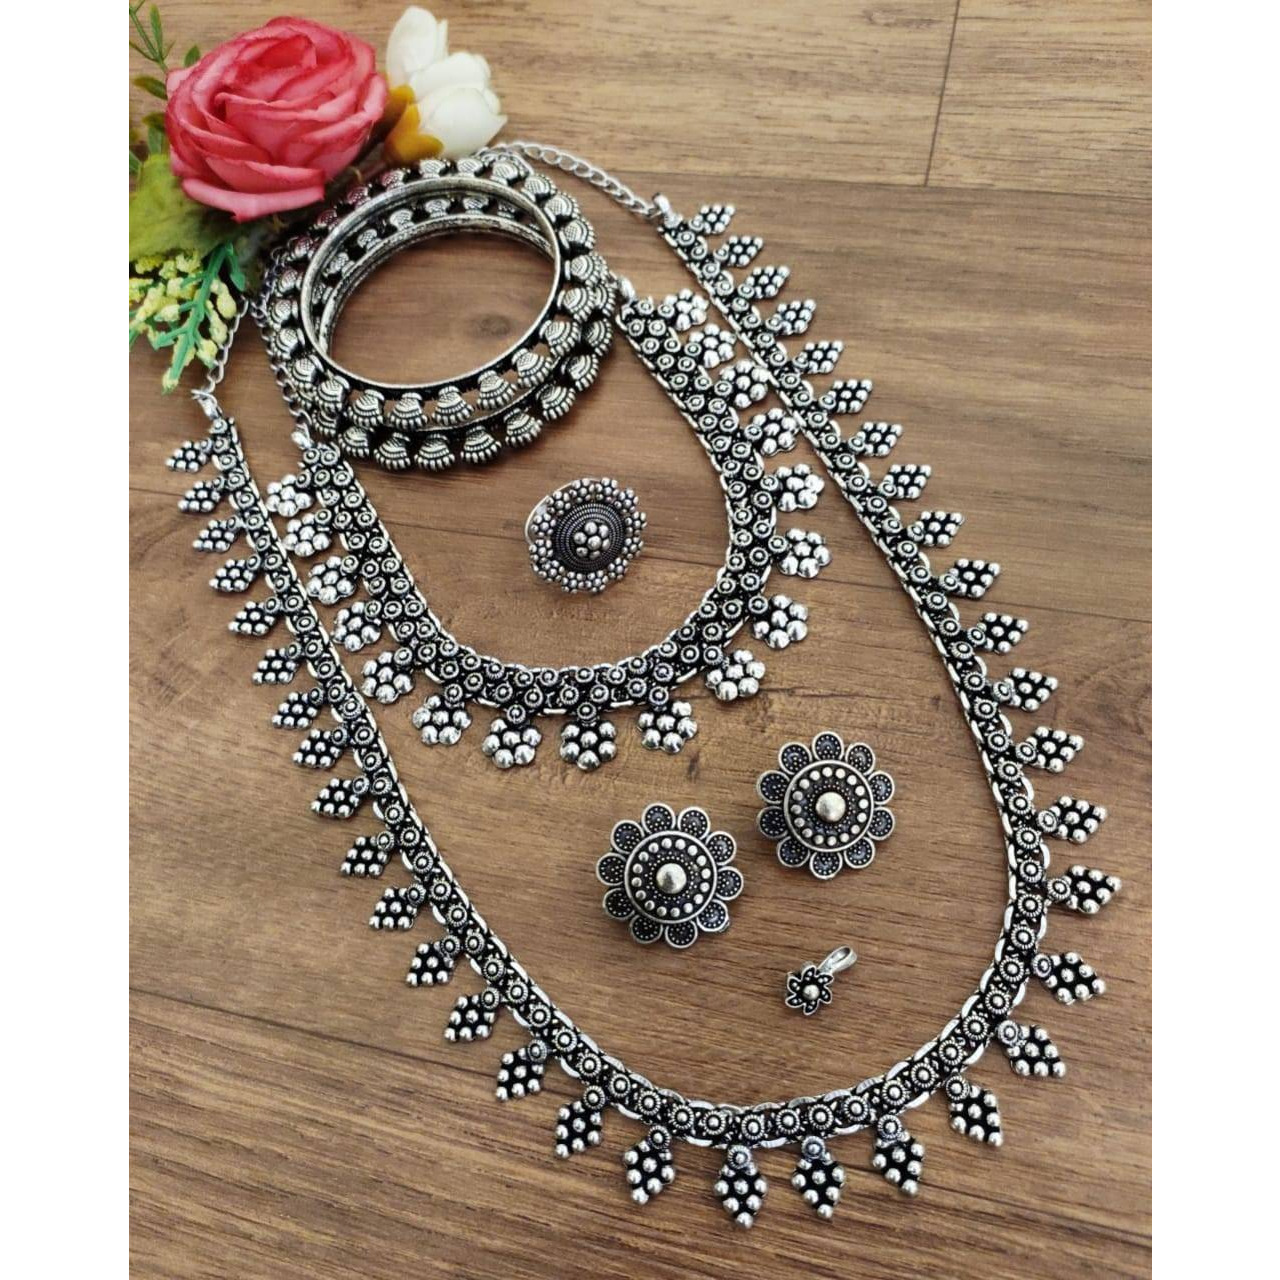 Afghani Jhumka Earrings made with high quality of silver oxidized and base is copper to maintain the finish long lasting, Also Black Polish make it perfect for stunning look while pair up them with any Indian or western wear.OCCASION: Wedding, Marriages, Casual, Party Wear, Engagement, casual Wear.